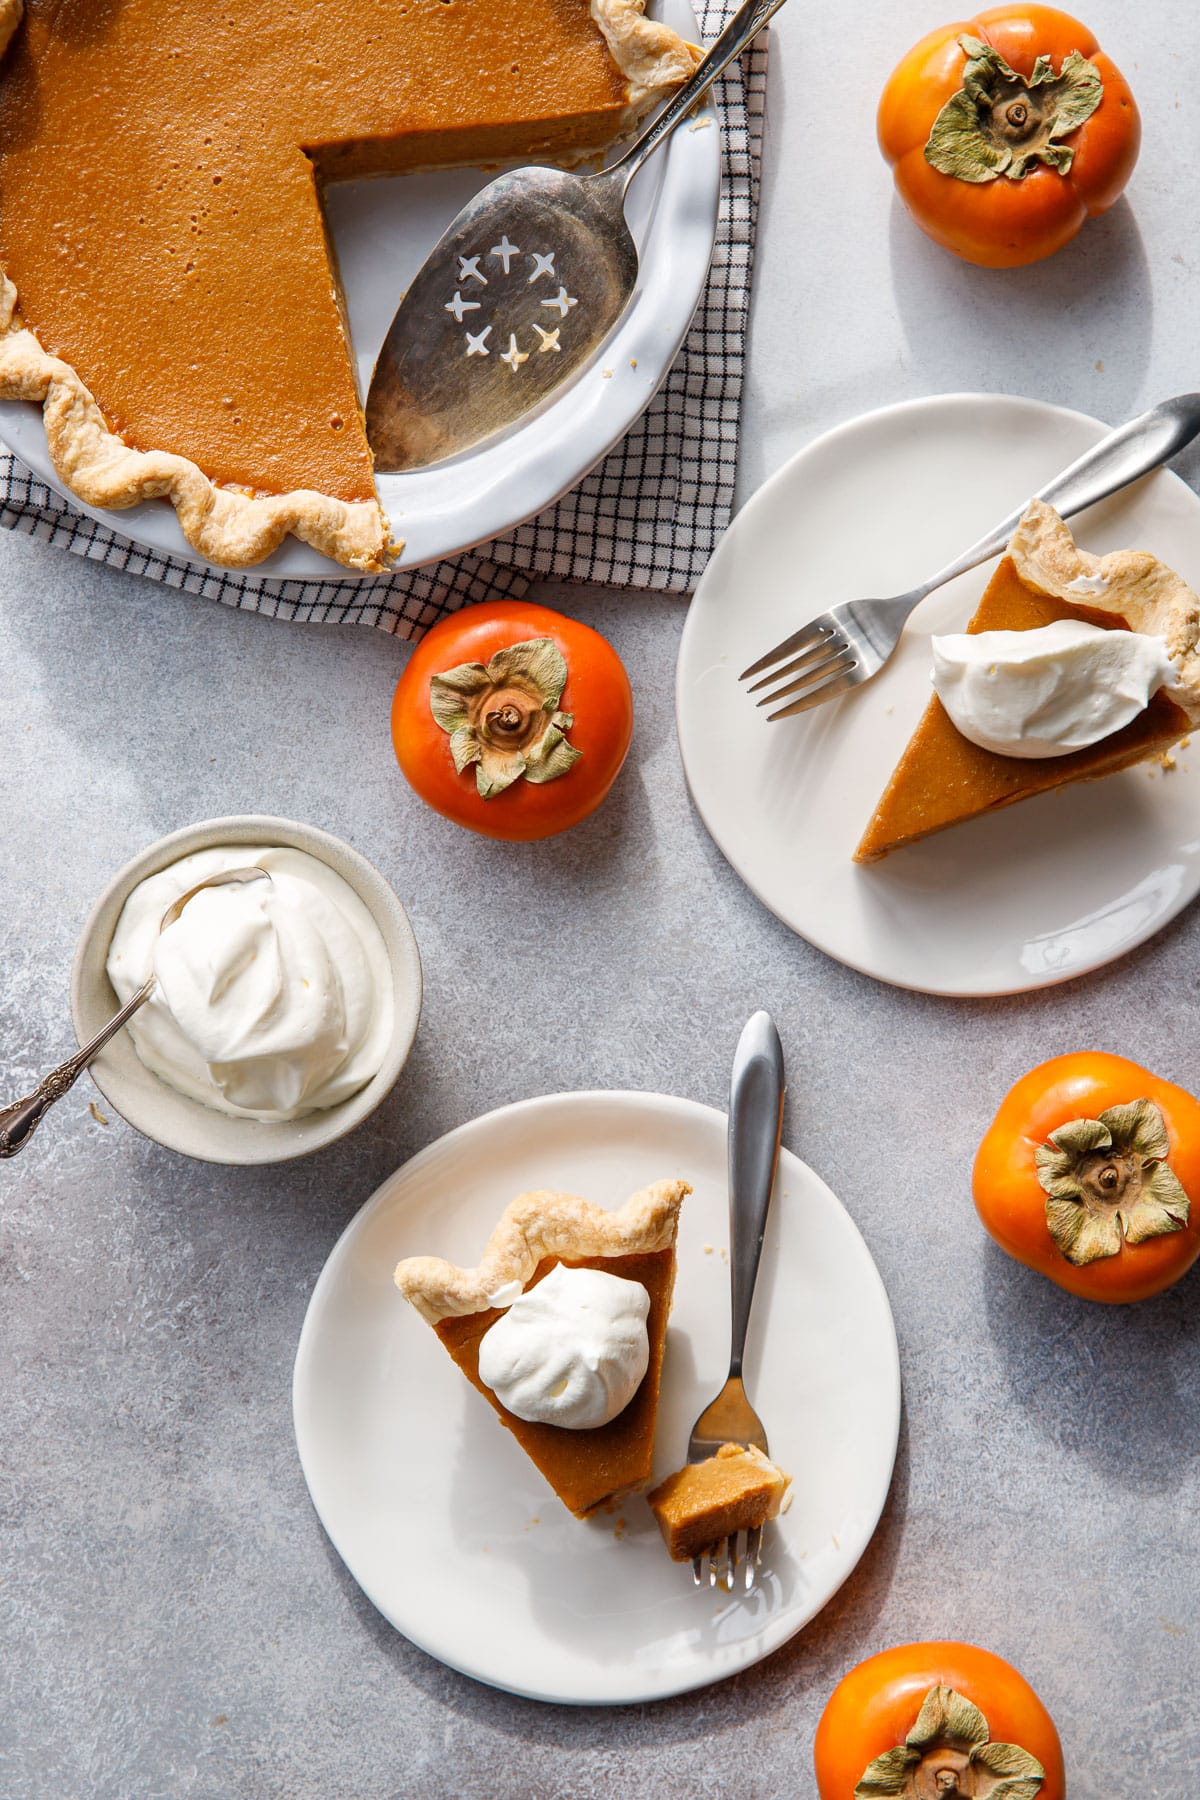 Overhead, two slices of Persimmon Pie on plates plus the rest of the whole pie, with Fuyu persimmons and a bowl of whipped cream.